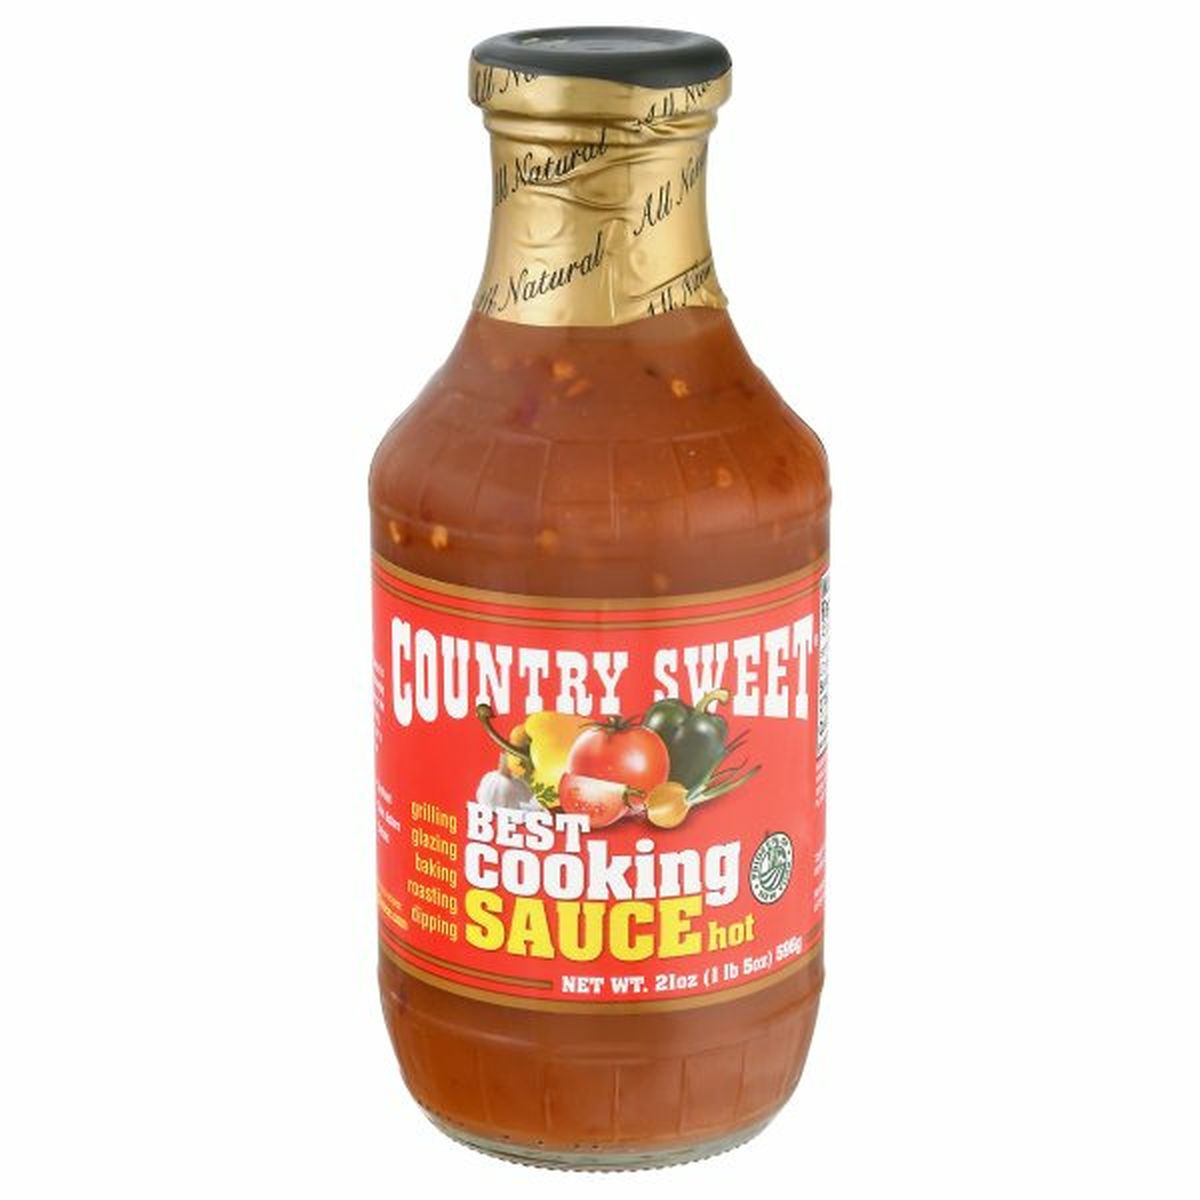 Calories in Country Sweet Cooking Sauce, Hot